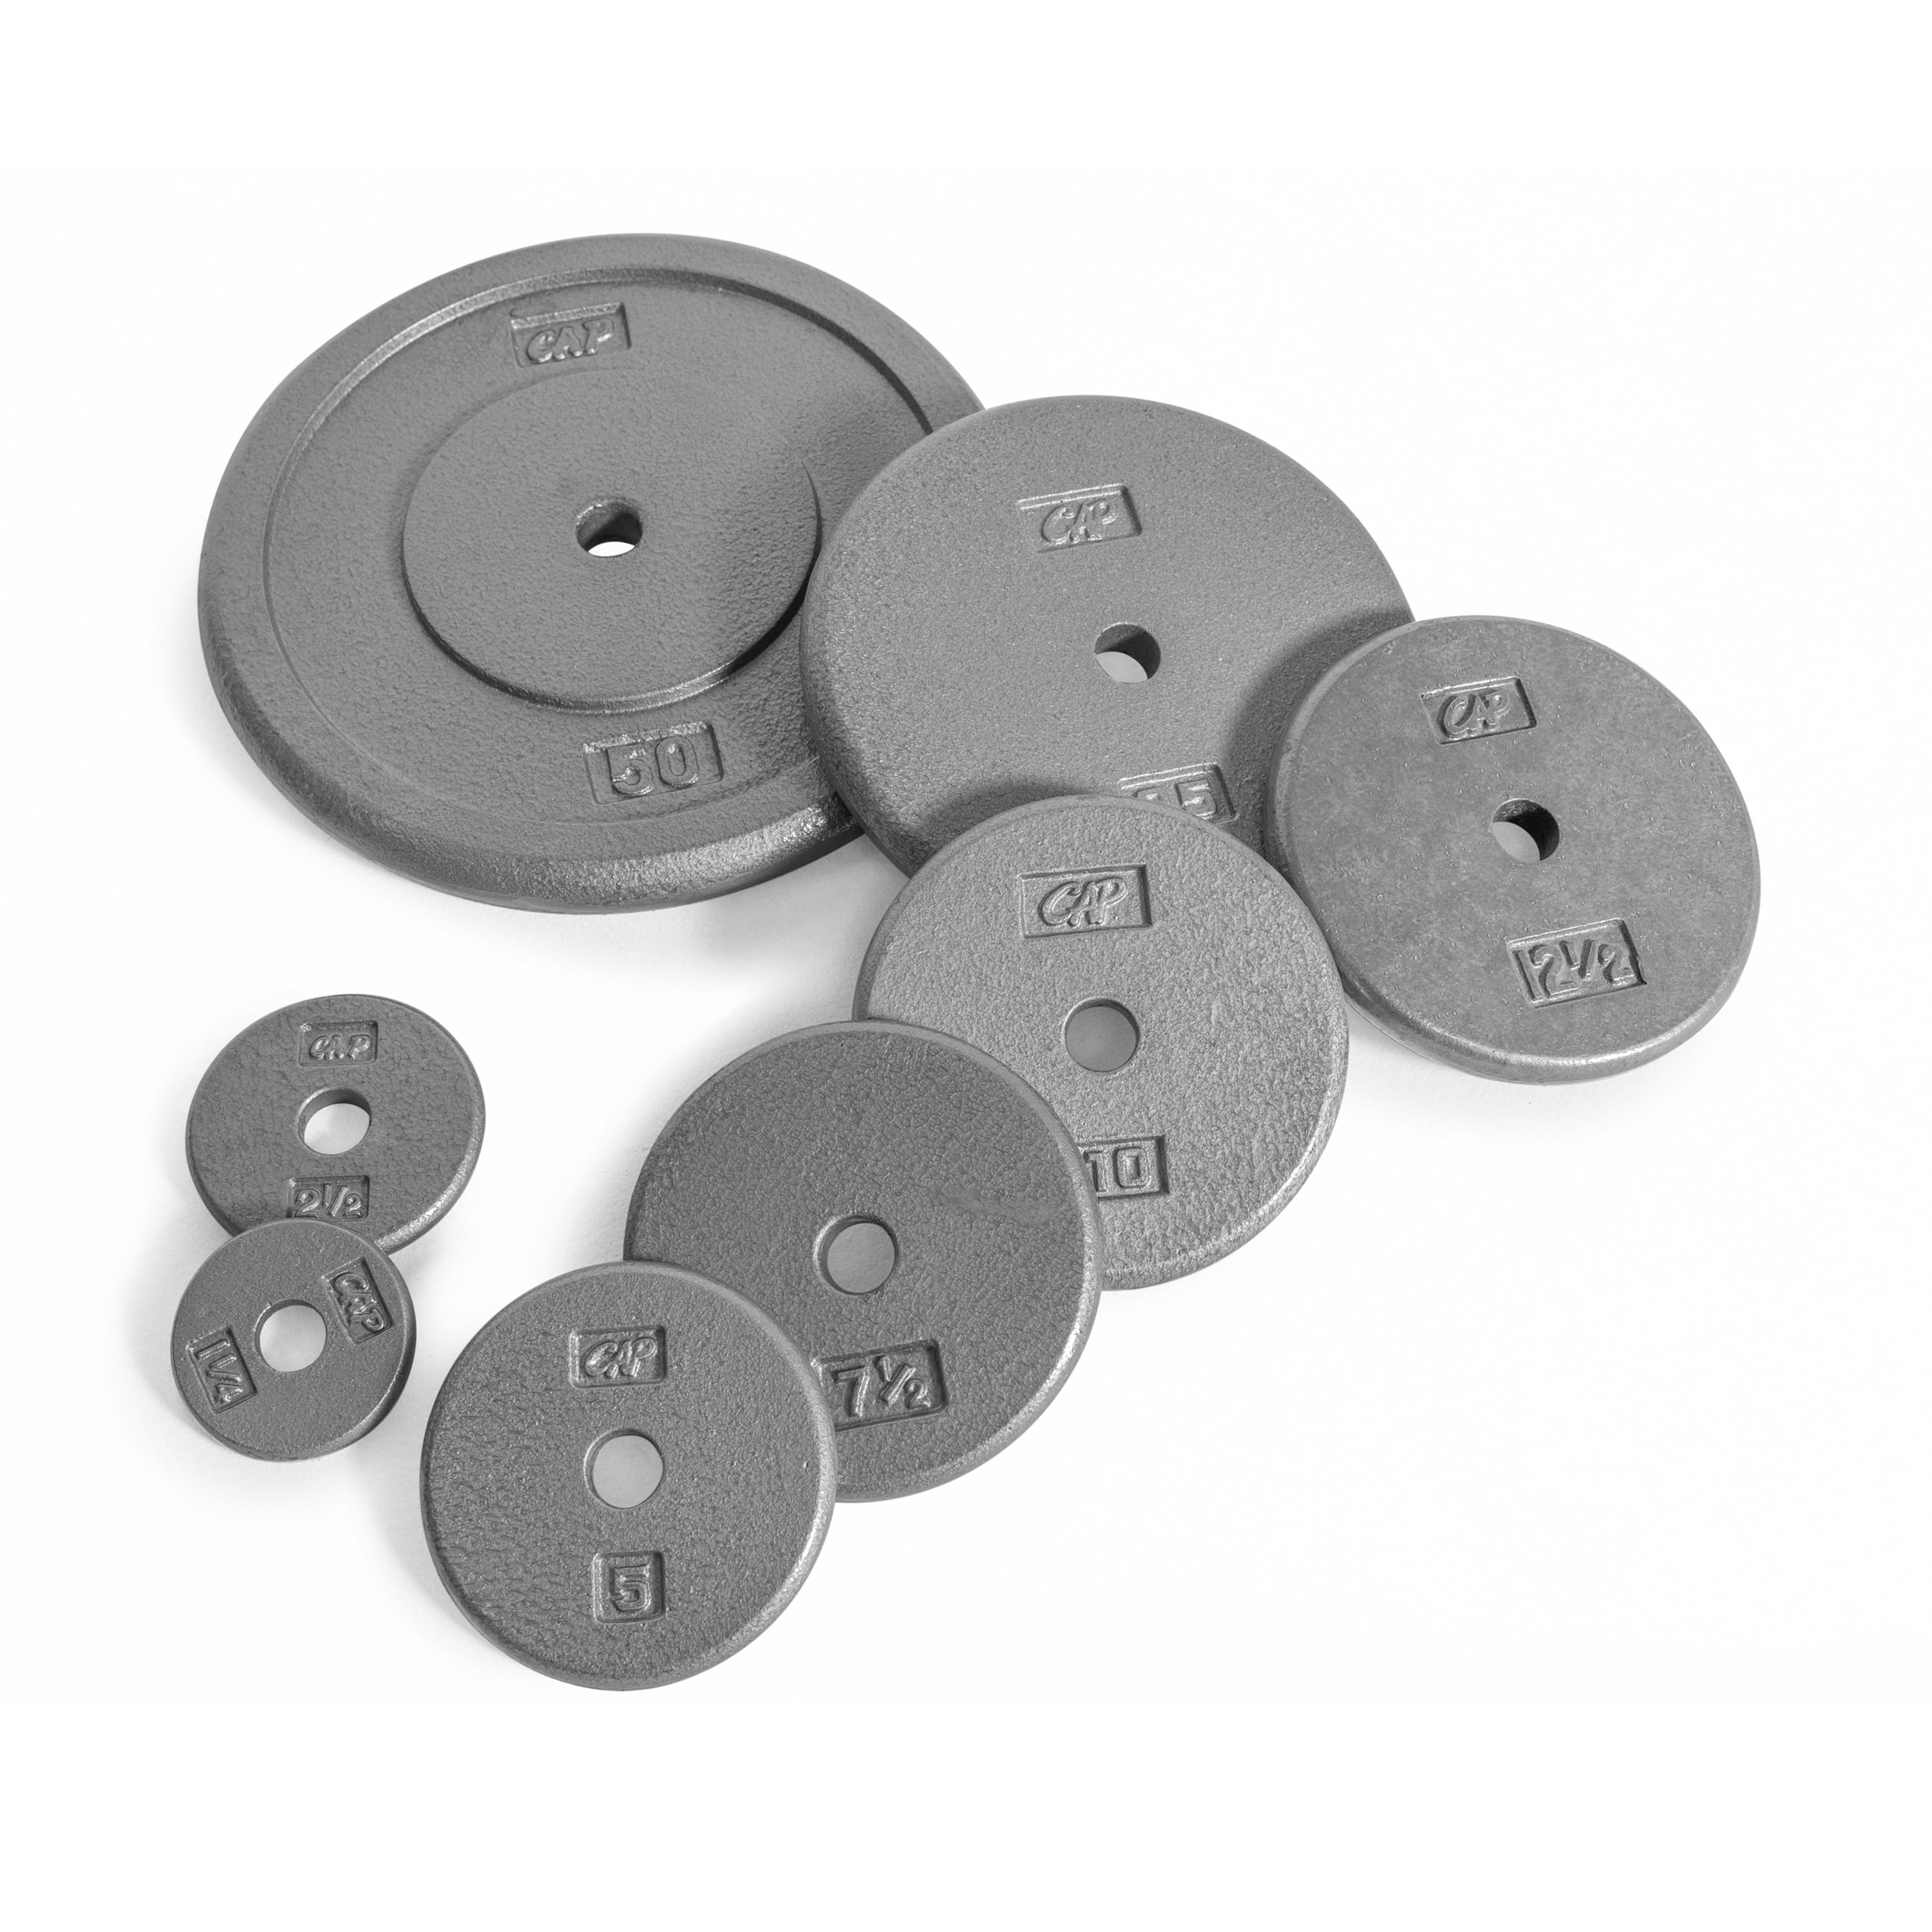 CAP Cast Iron Standard 1” Plates Set of Four 10 lb Pound Weights IN HAND 